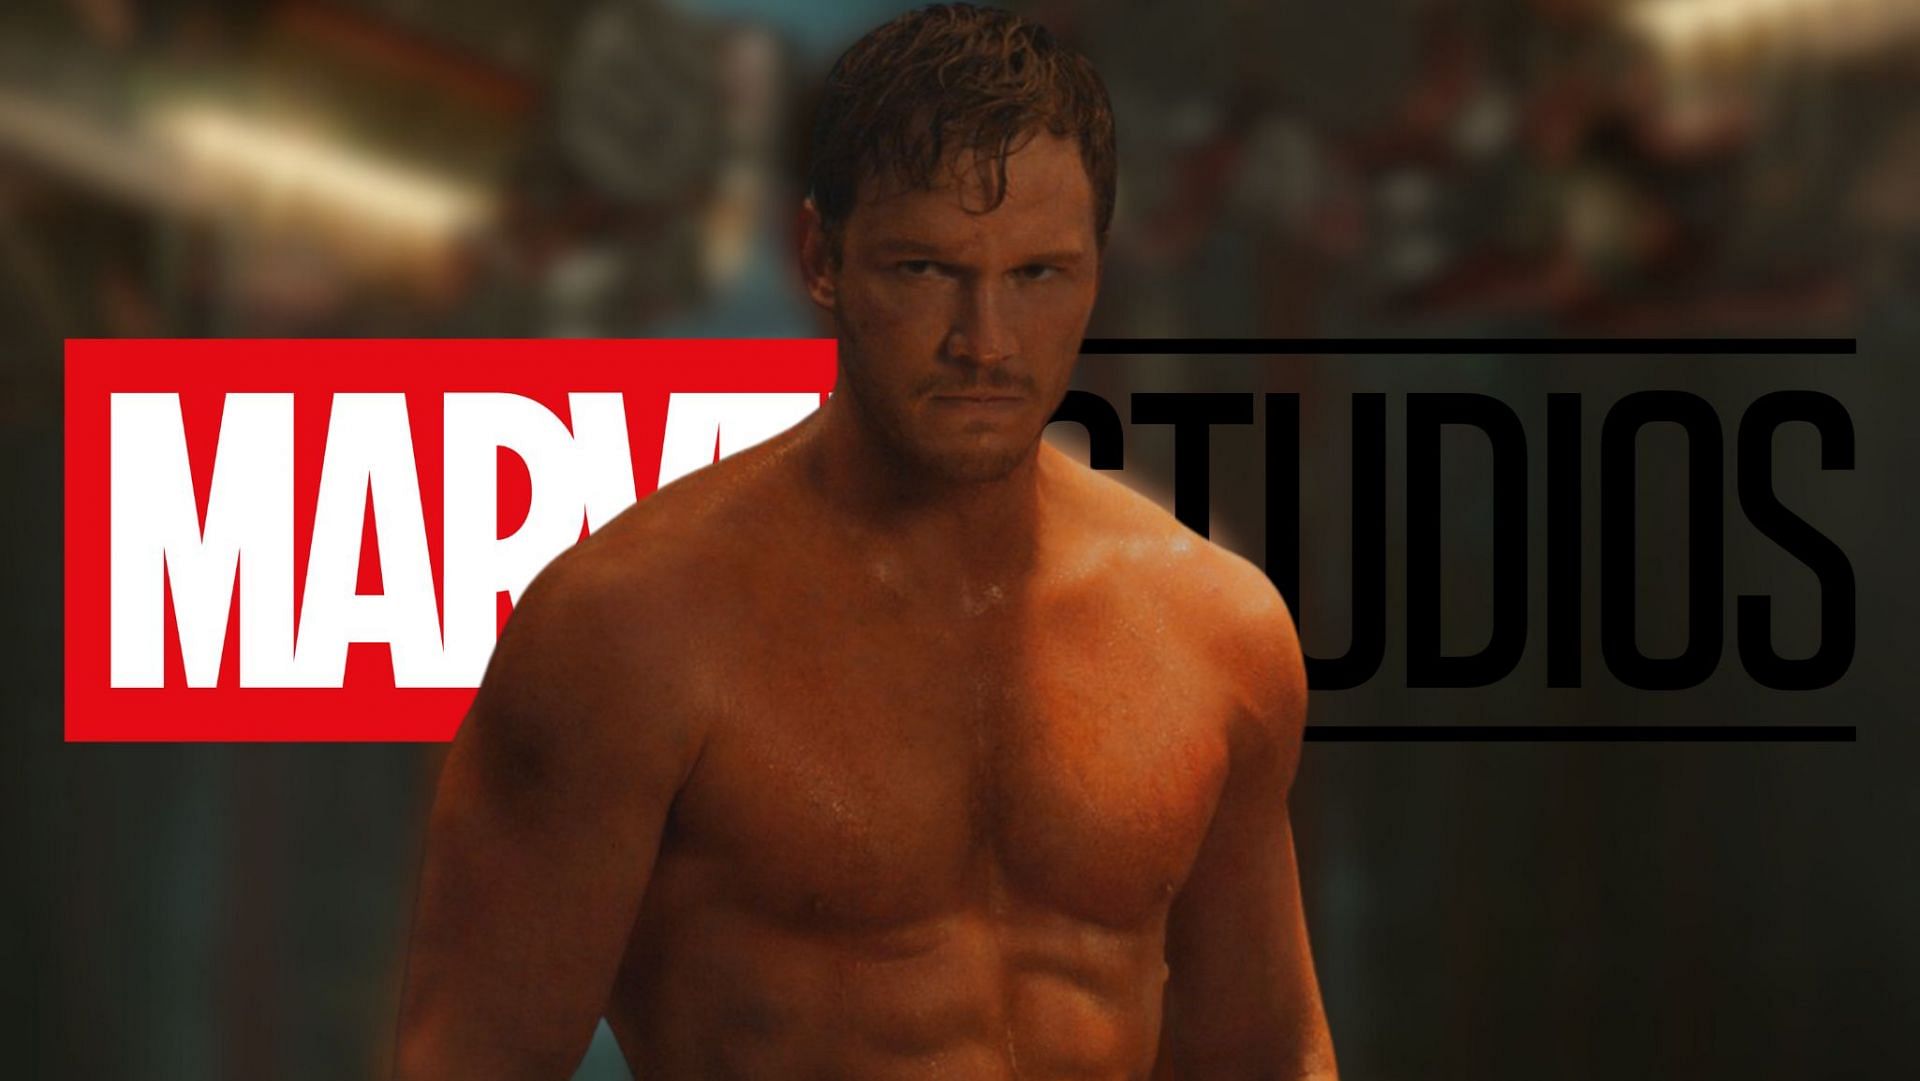 Guardians of the Galaxy Vol. 3 breaks new ground in the MCU with the first uncensored F-bomb, dropped by Chris Pratt